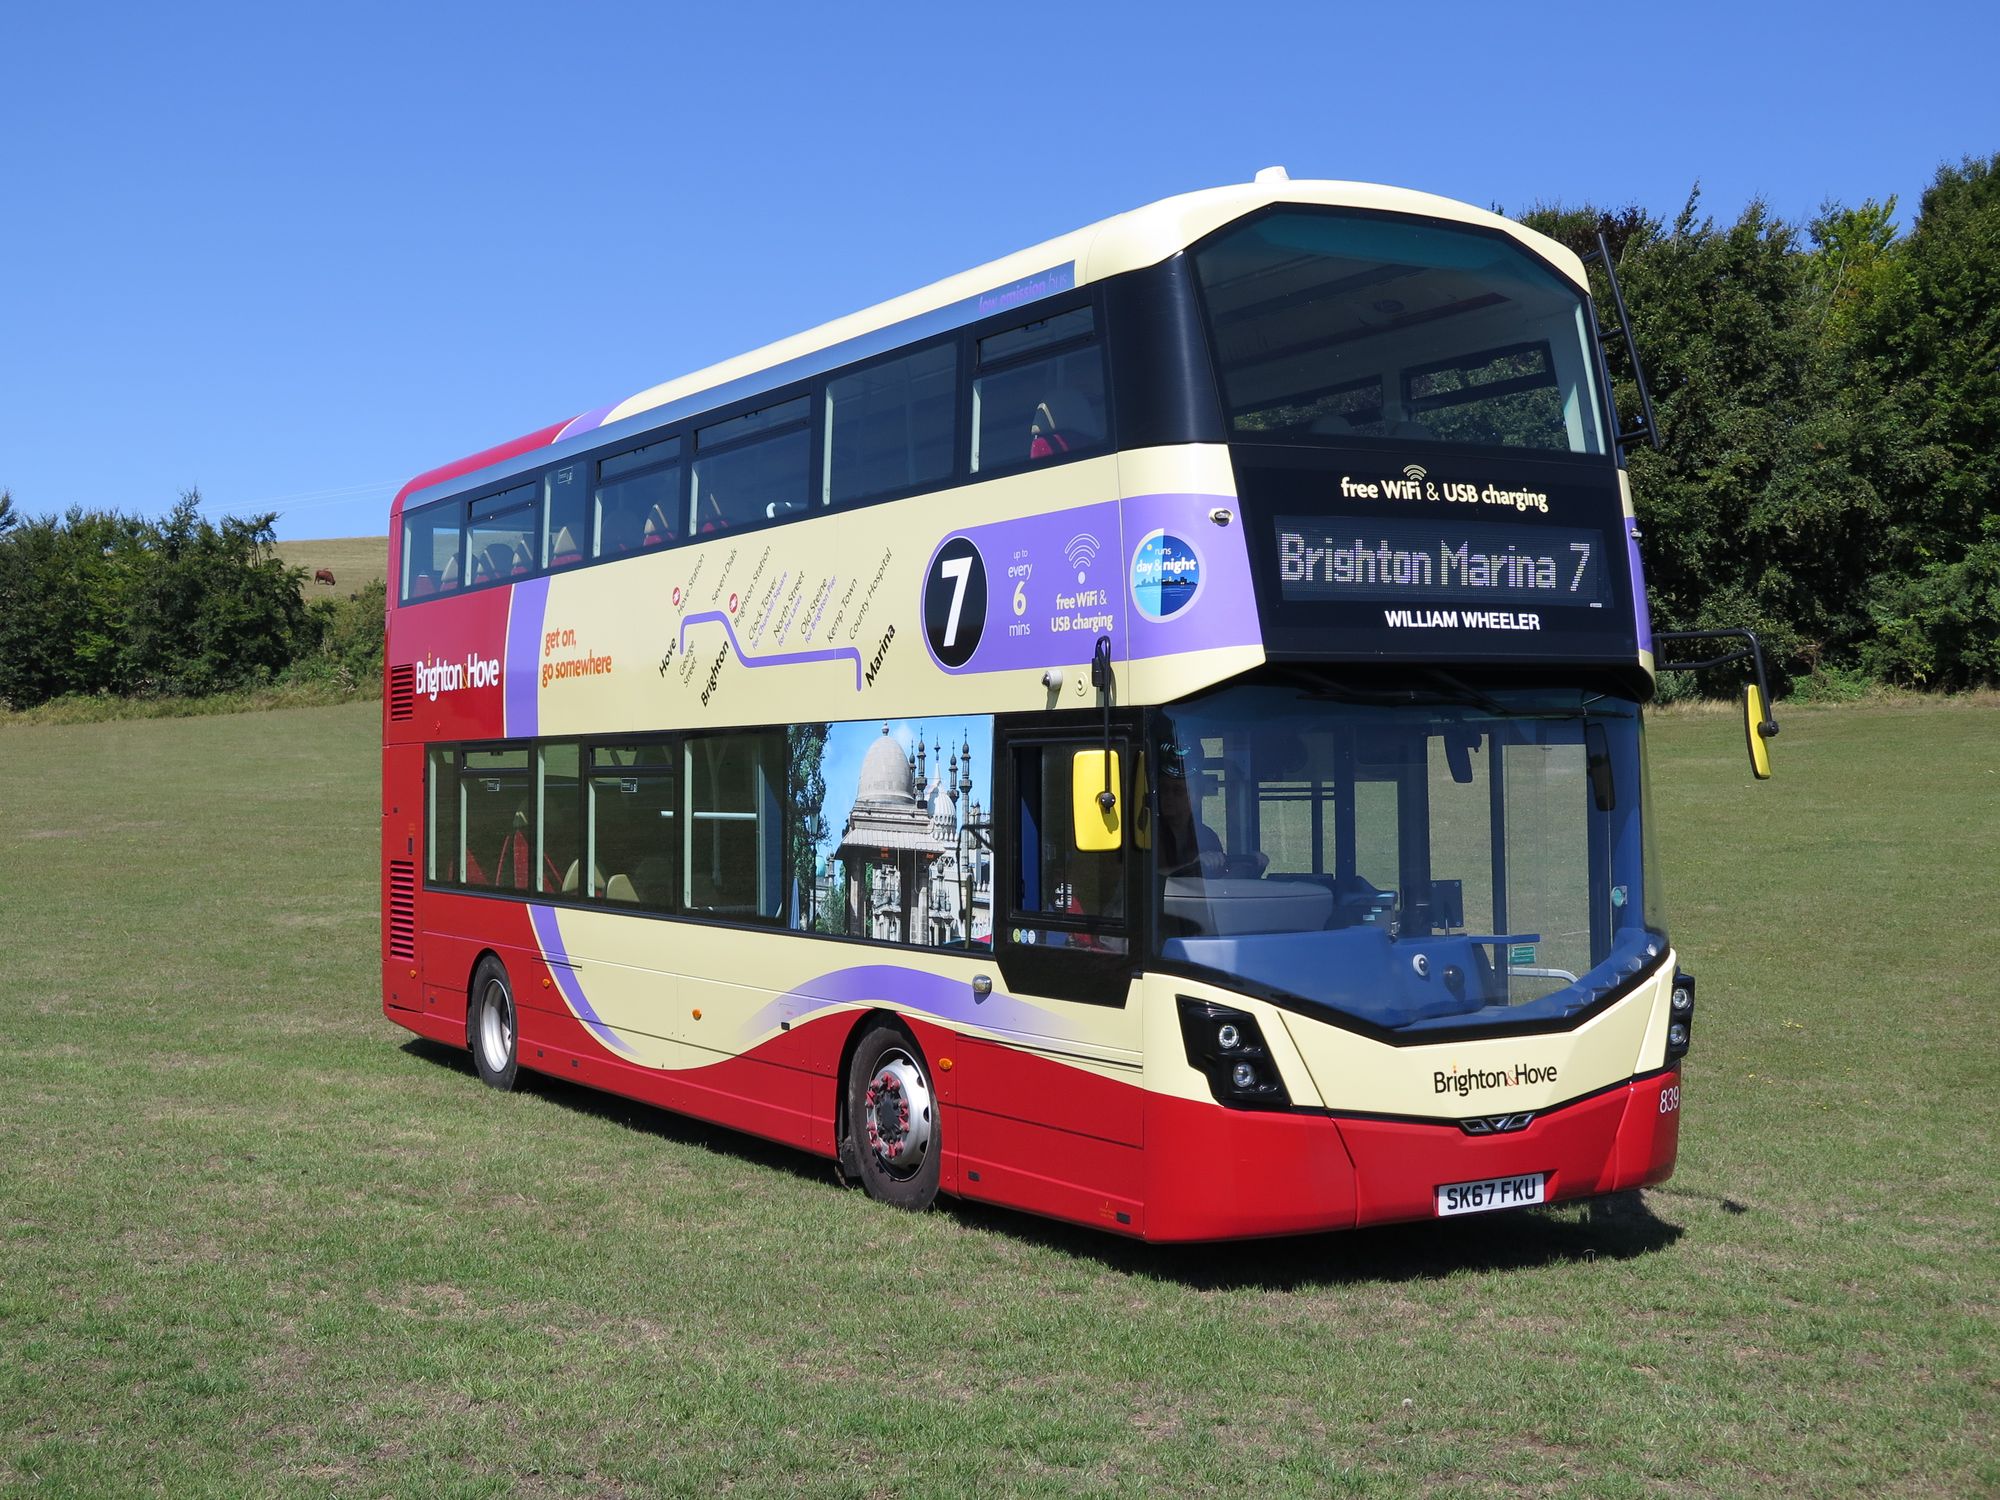 A picture of a No.7 bus in a field for some reason